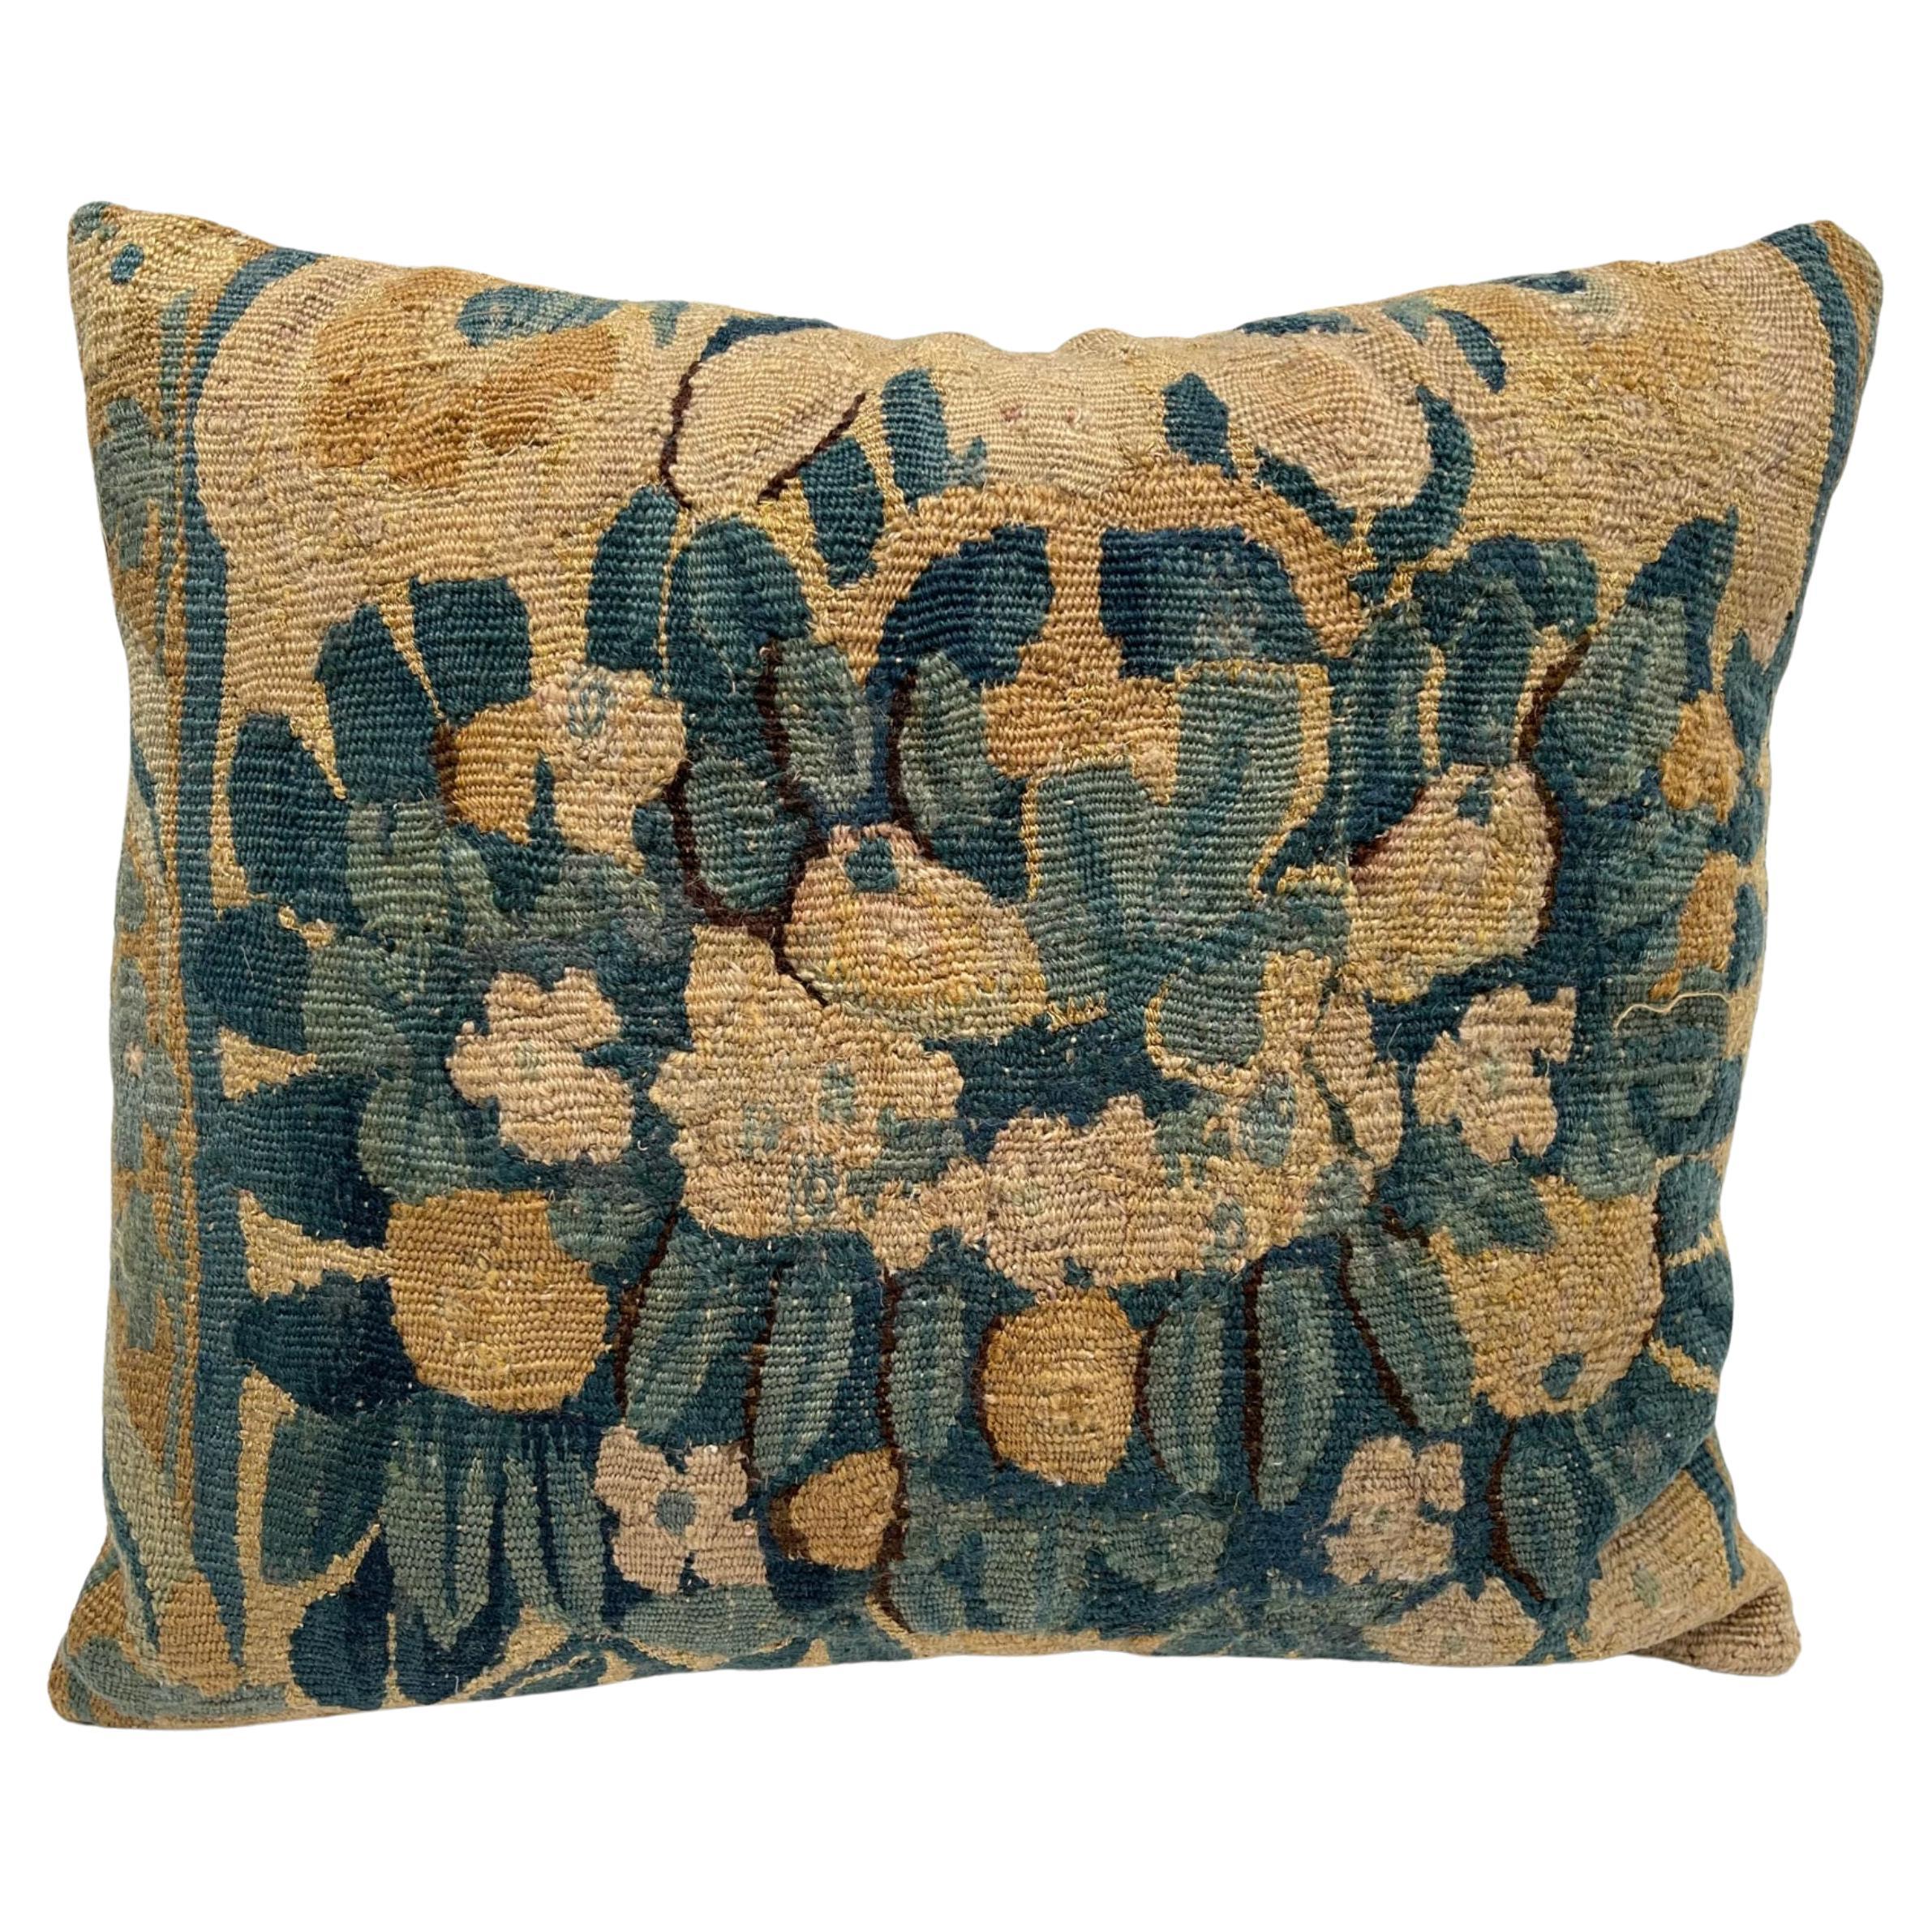 Mid-17th Century Flemish Tapestry Pillow